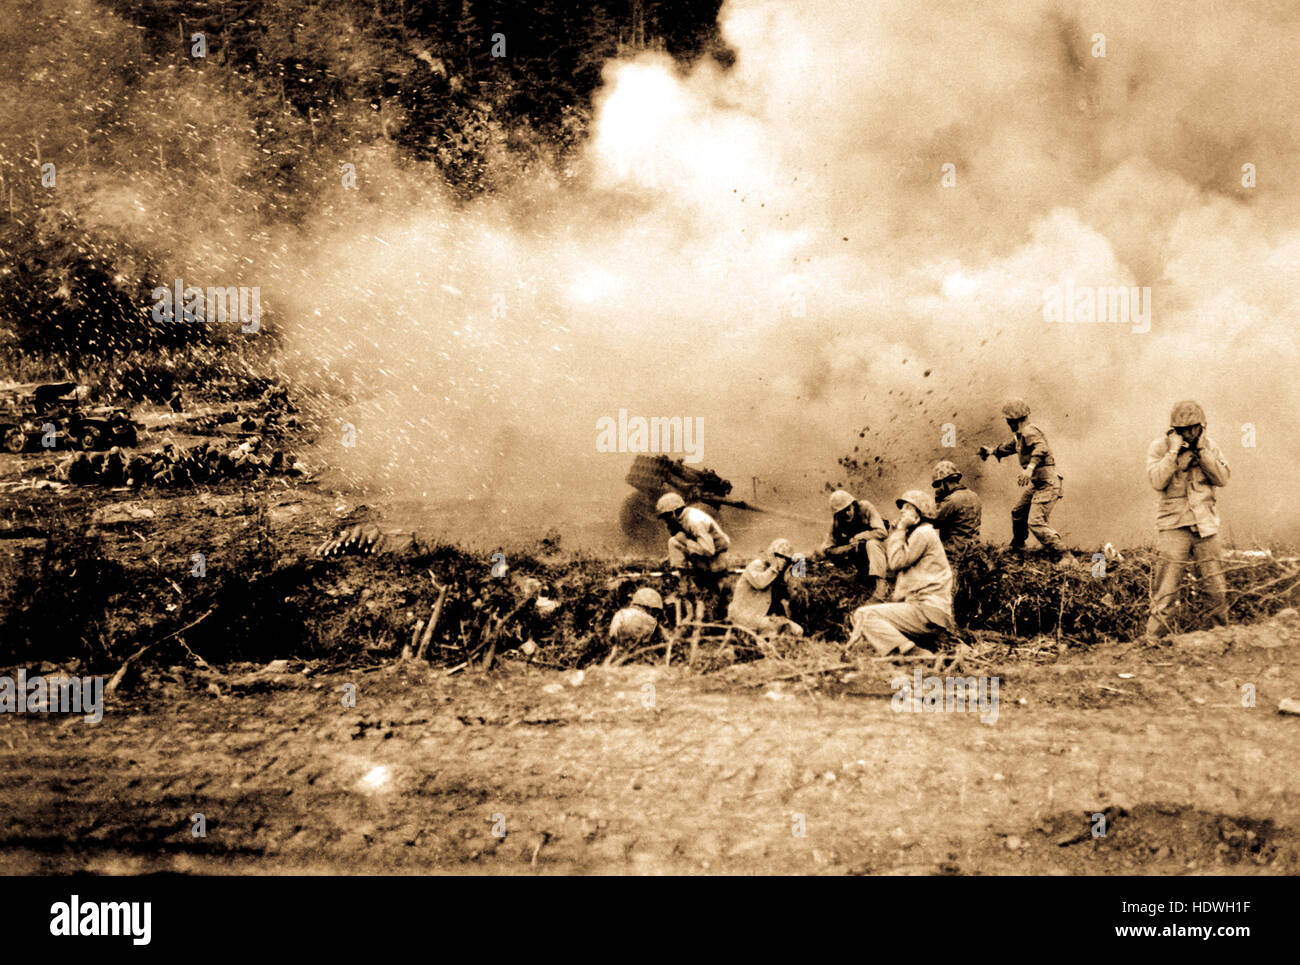 U.S. Marines launch a rocket barrage against the Chinese Communists in Korean War fighting. Stock Photo